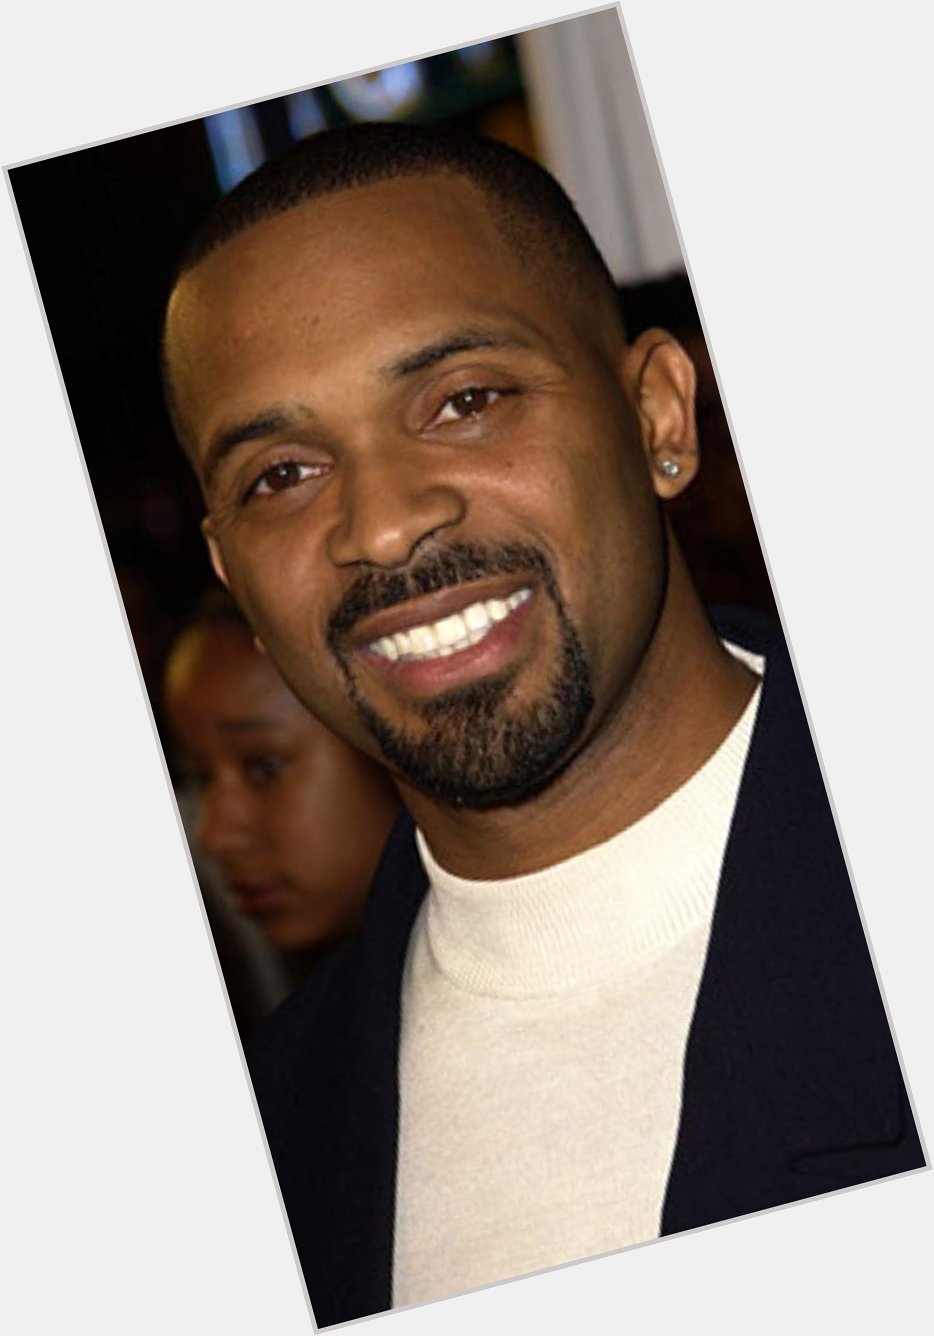 Wishing my favorite actor and comedian Mike Epps a Happy Birthday from all of his funny movies        